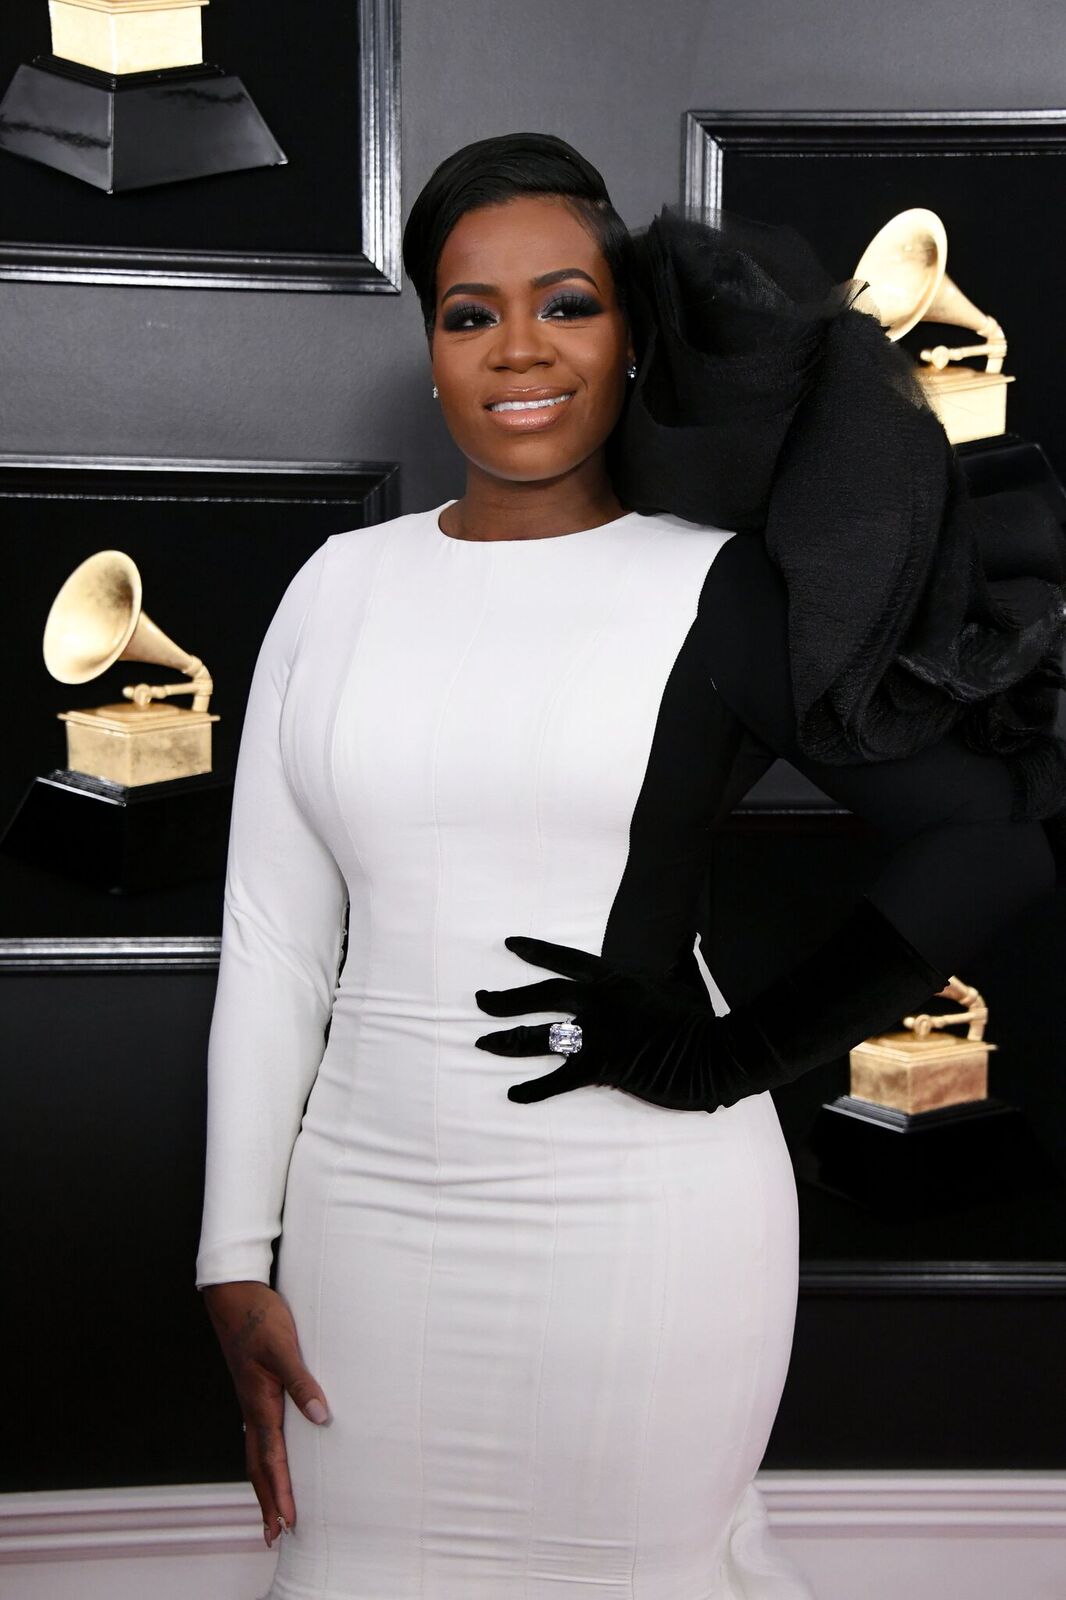 Fantasia Barrino at the 61st Annual Grammy Awards at Staples Center on February 10, 2019. | Photo: Getty Images